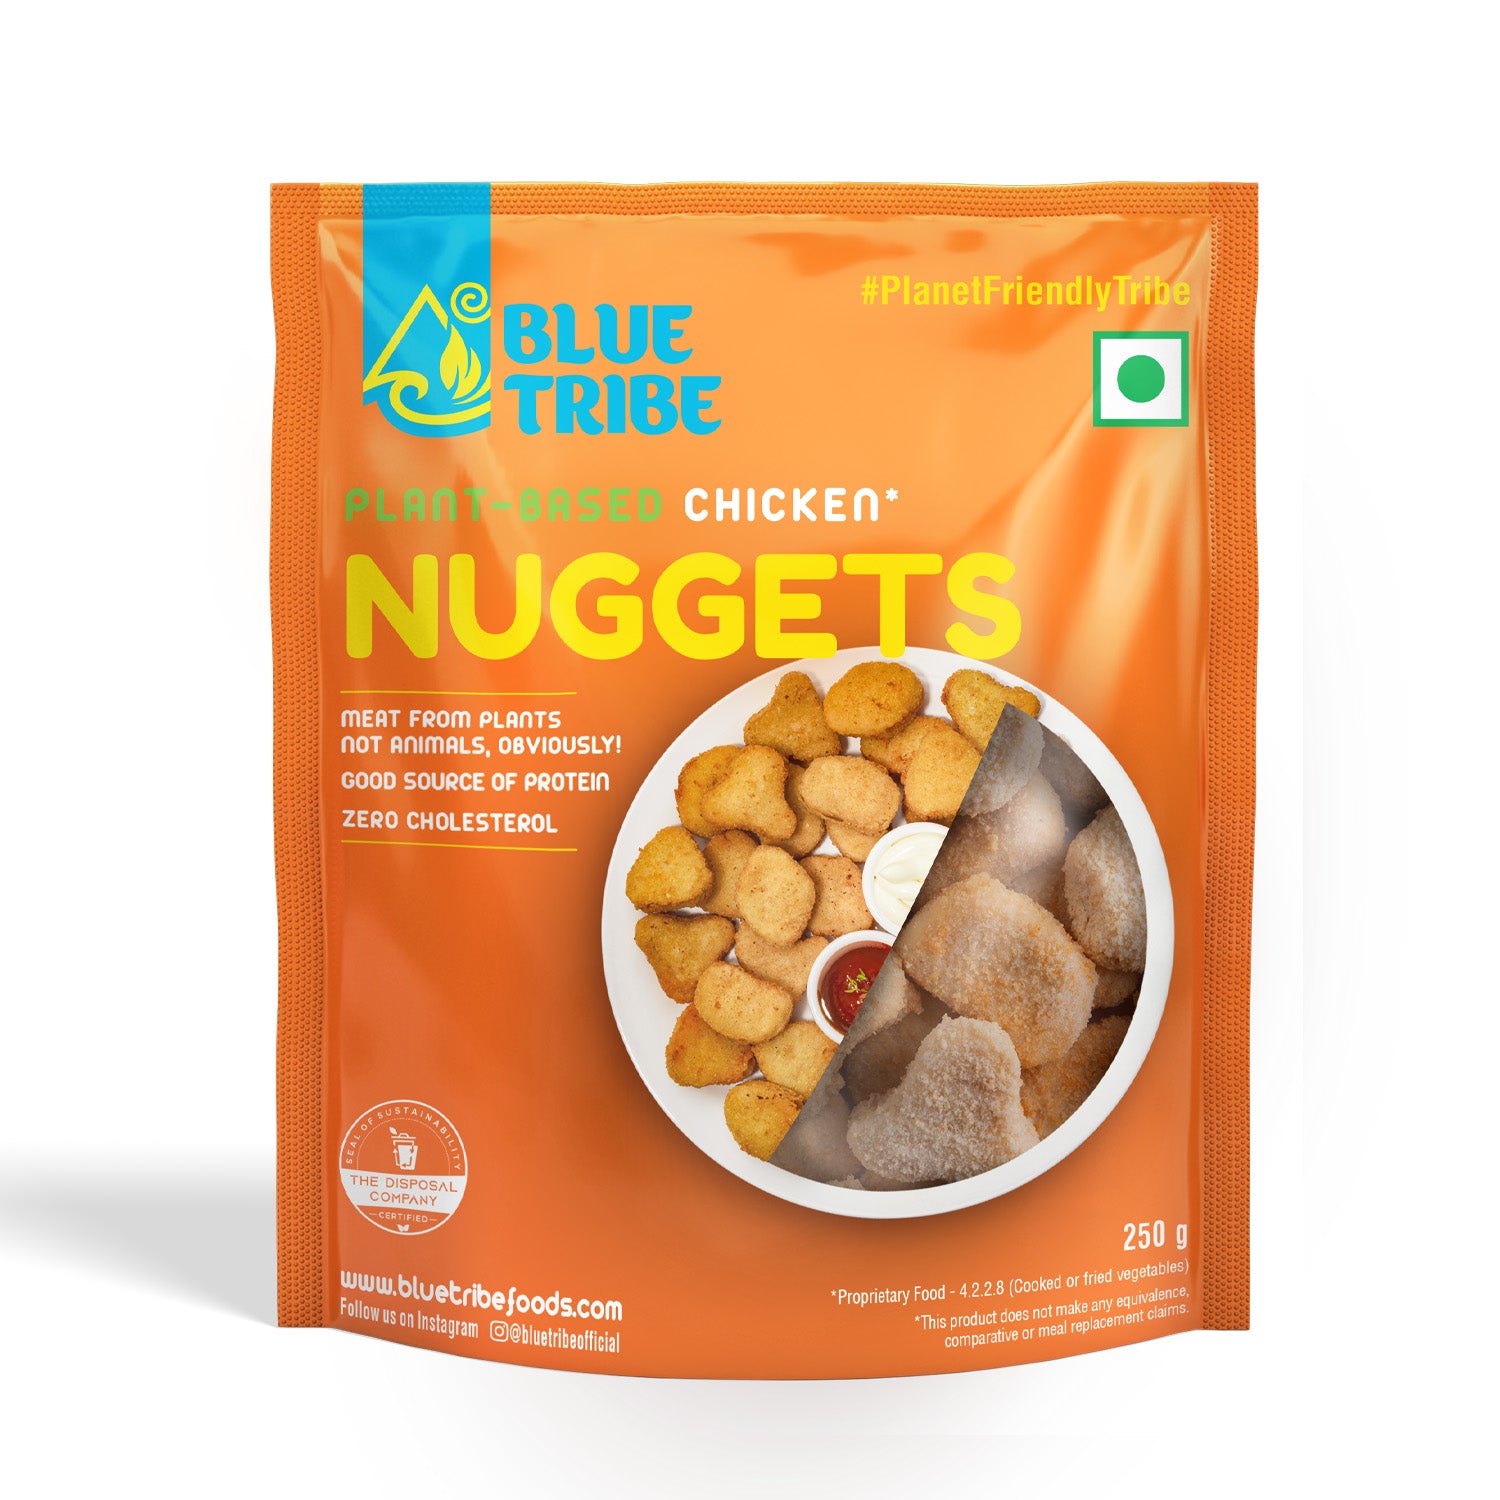 BLUE TRIBE Plant-Based Chicken Nuggets, 250g